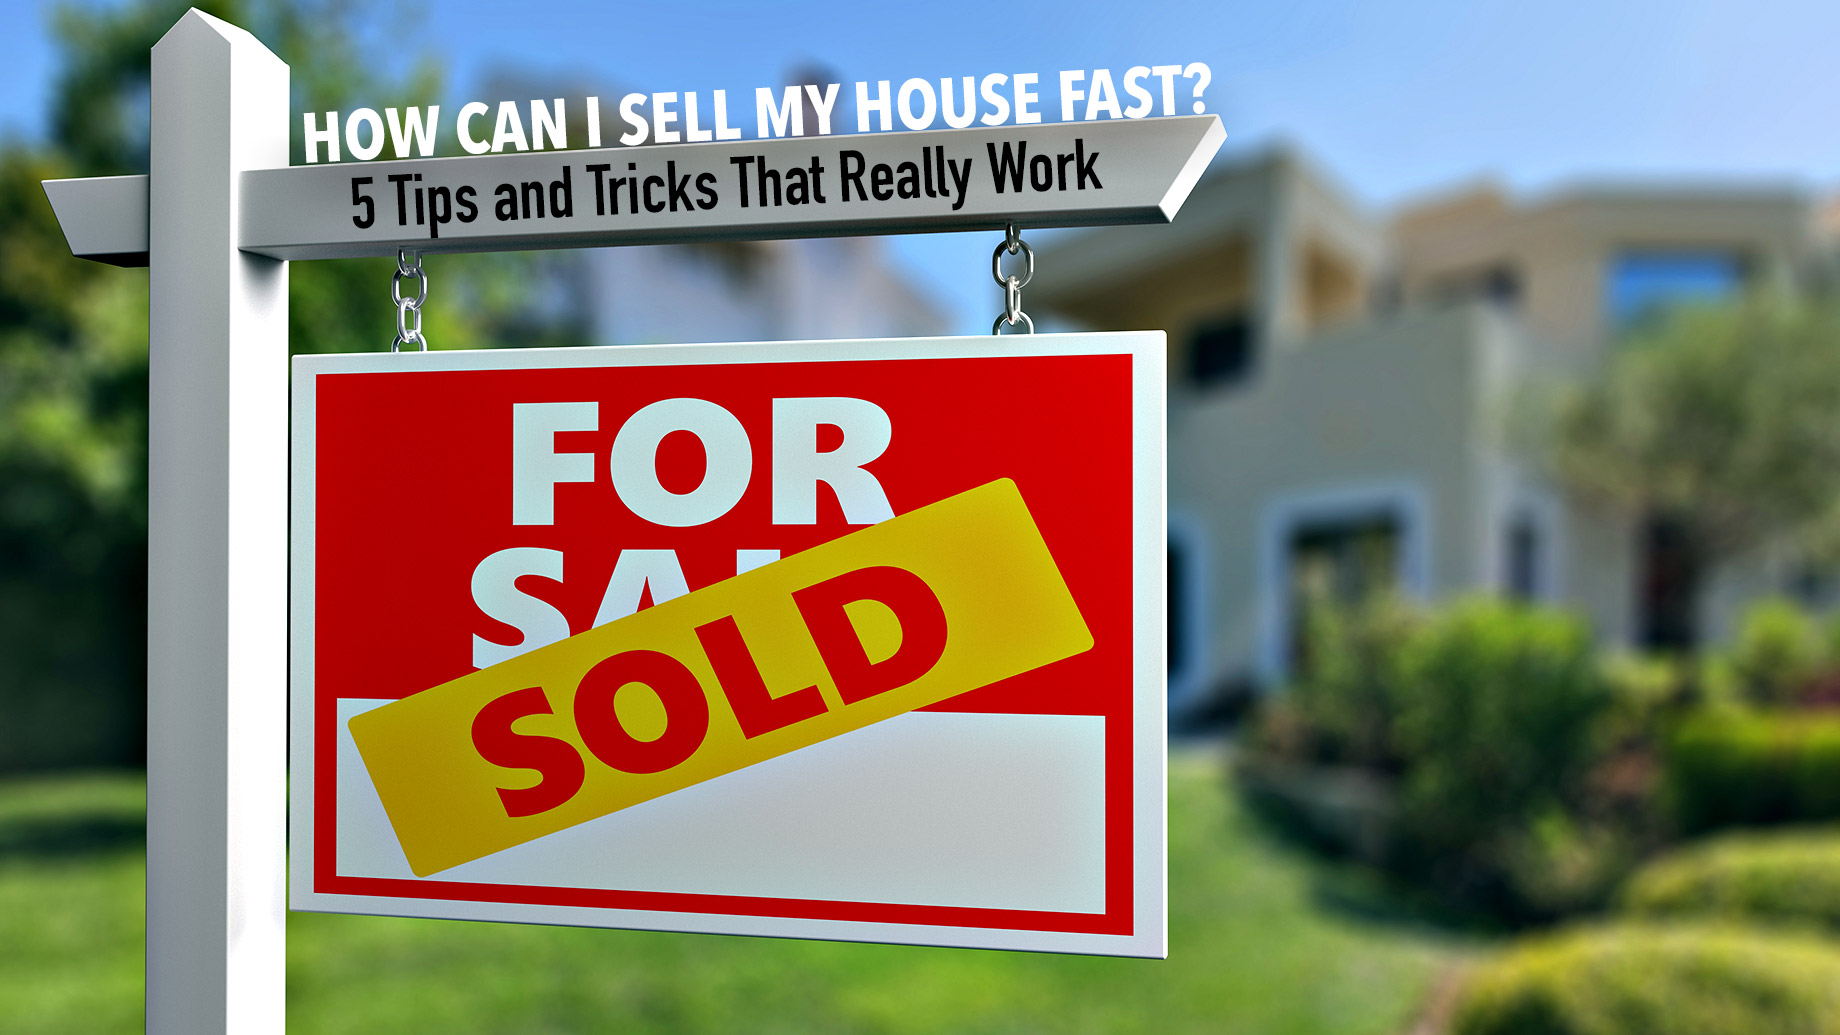 How Can I Sell My House Fast? 5 Tips and Tricks That Really Work